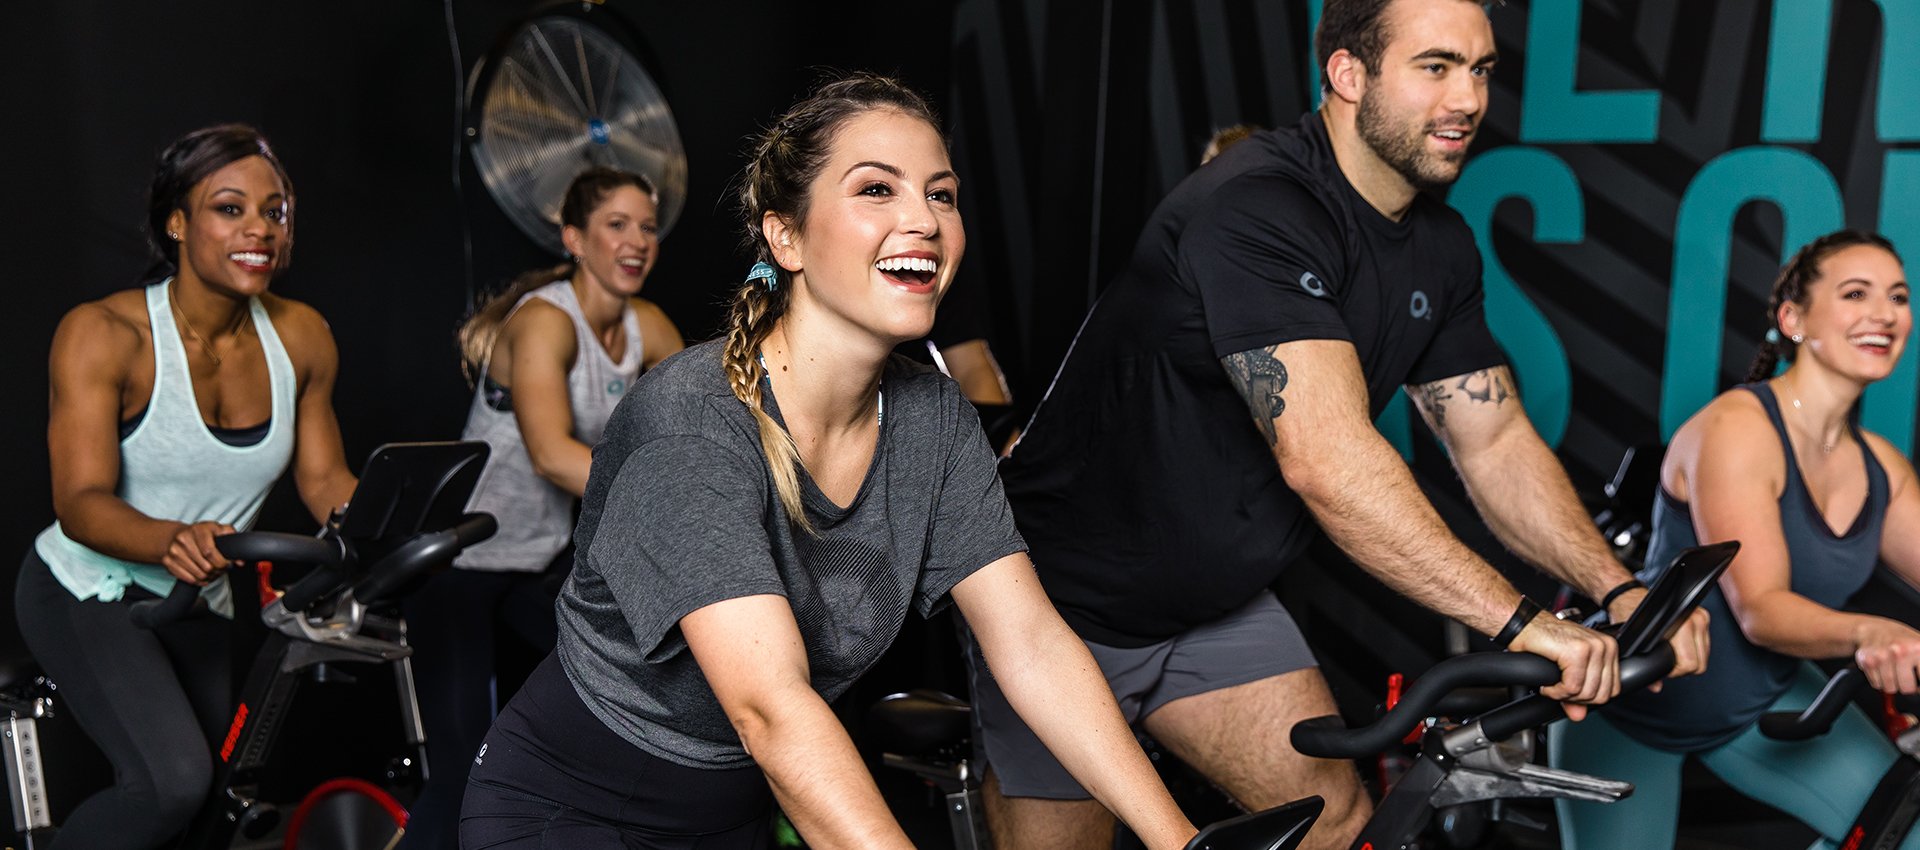 Ride - Group Fitness Classes | O2 Fitness Clubs & Gyms